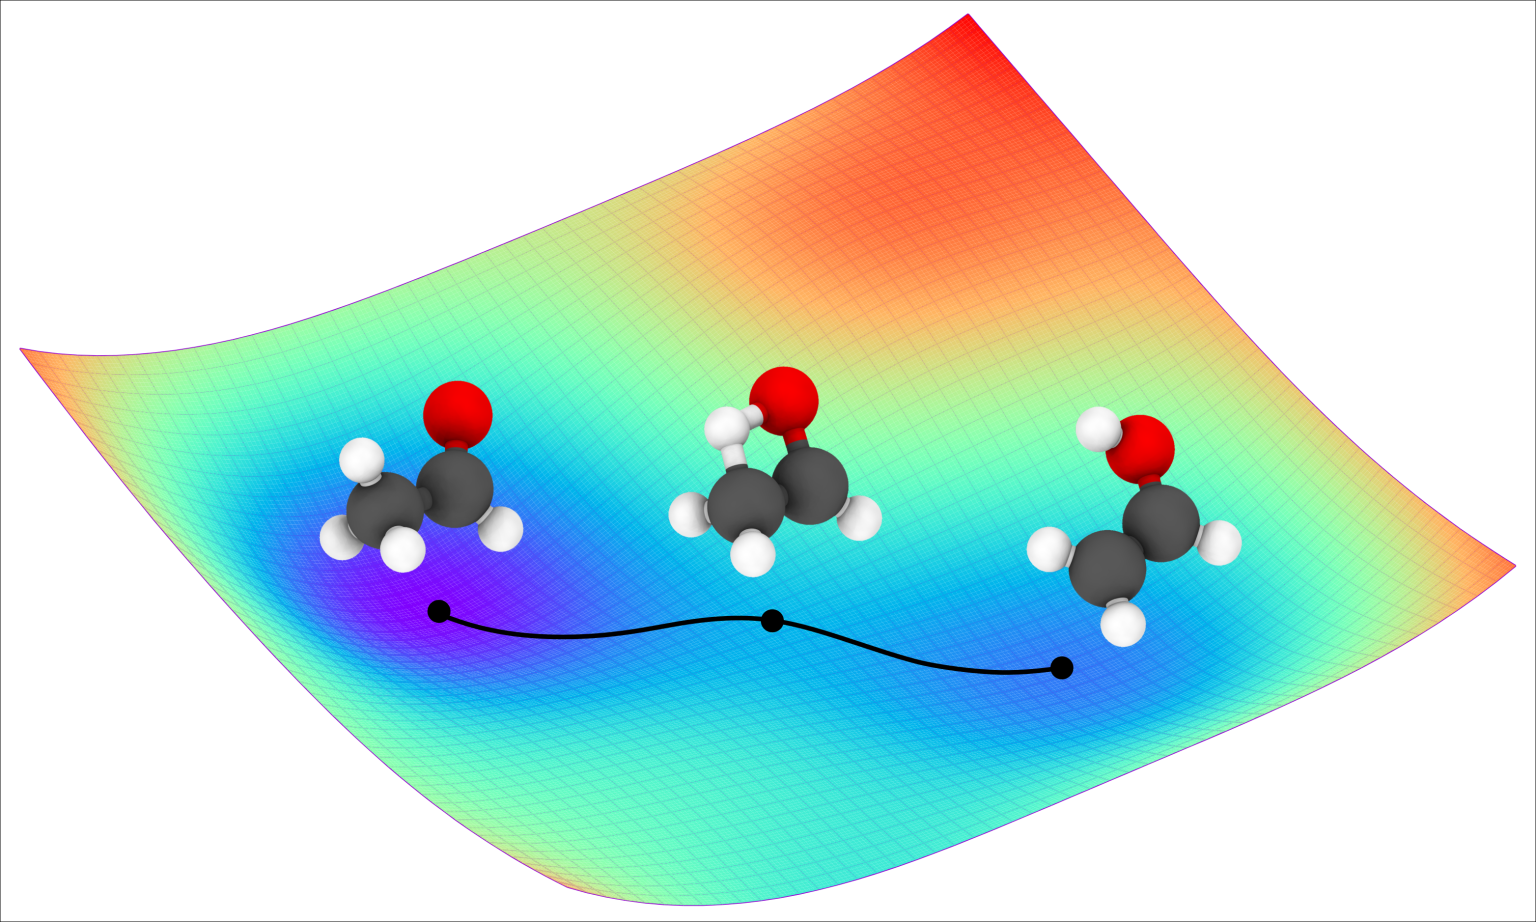 Simplified two-dimensional depiction of the potential energy surface of the atoms C2H4O. The actual potential energy surface is 15-dimensional. Areas with low potential energy are depicted in blue; those with high potential energy in red. The black line depicts the reaction from ethanal (left) to ethenol (right).